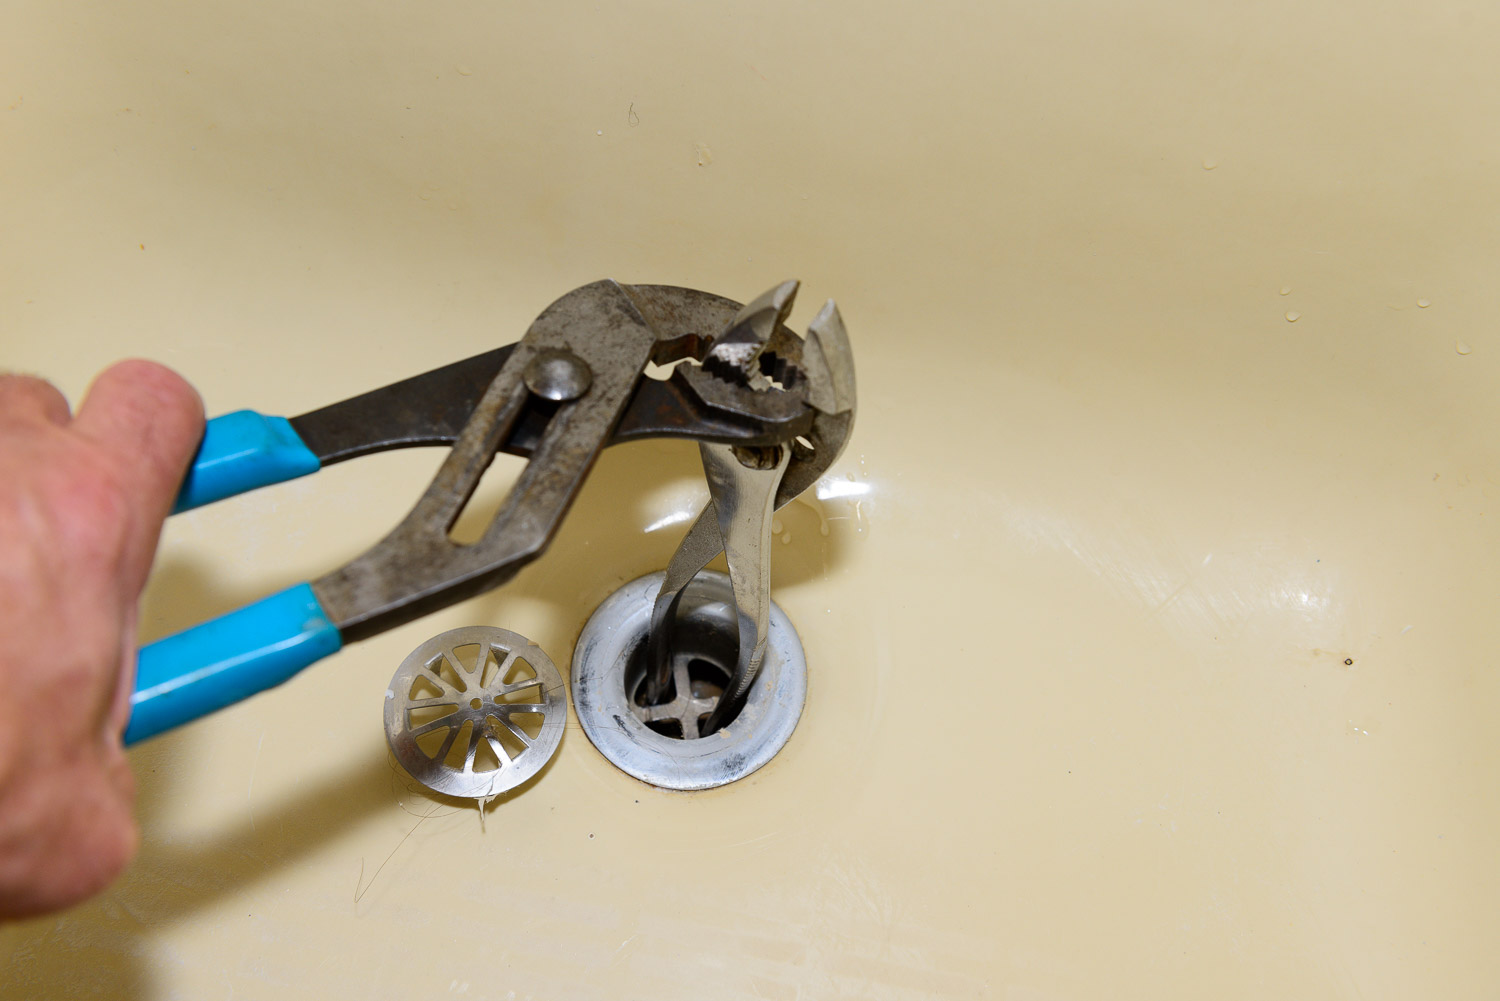 Instead of buying a tool to rotate the drain fitting you can stick your pliers handle in the drain and unscrew it.